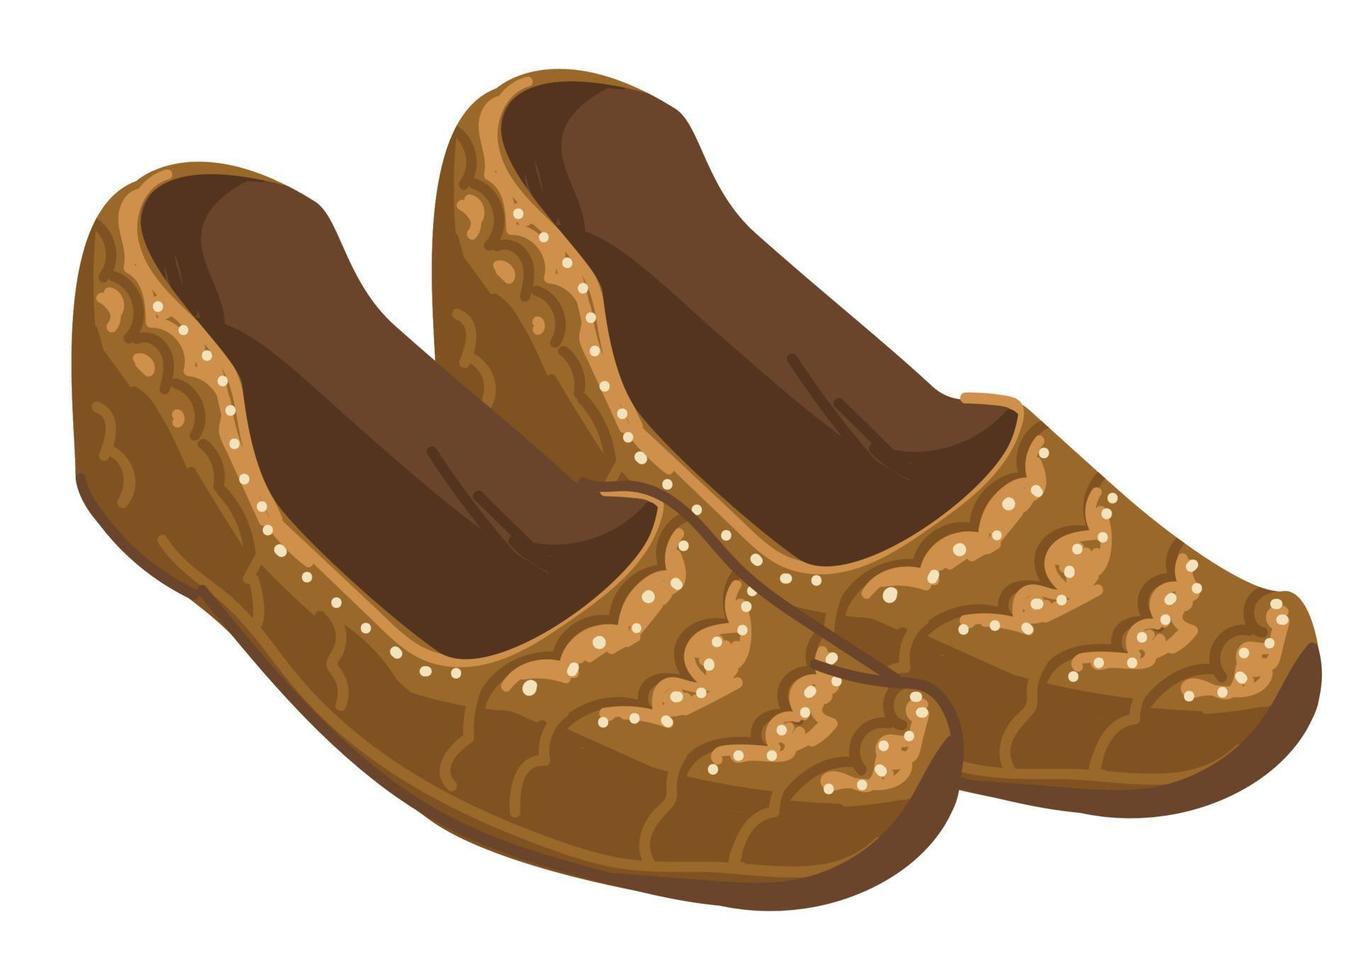 Indian women shoes made of textile, old footwear vector